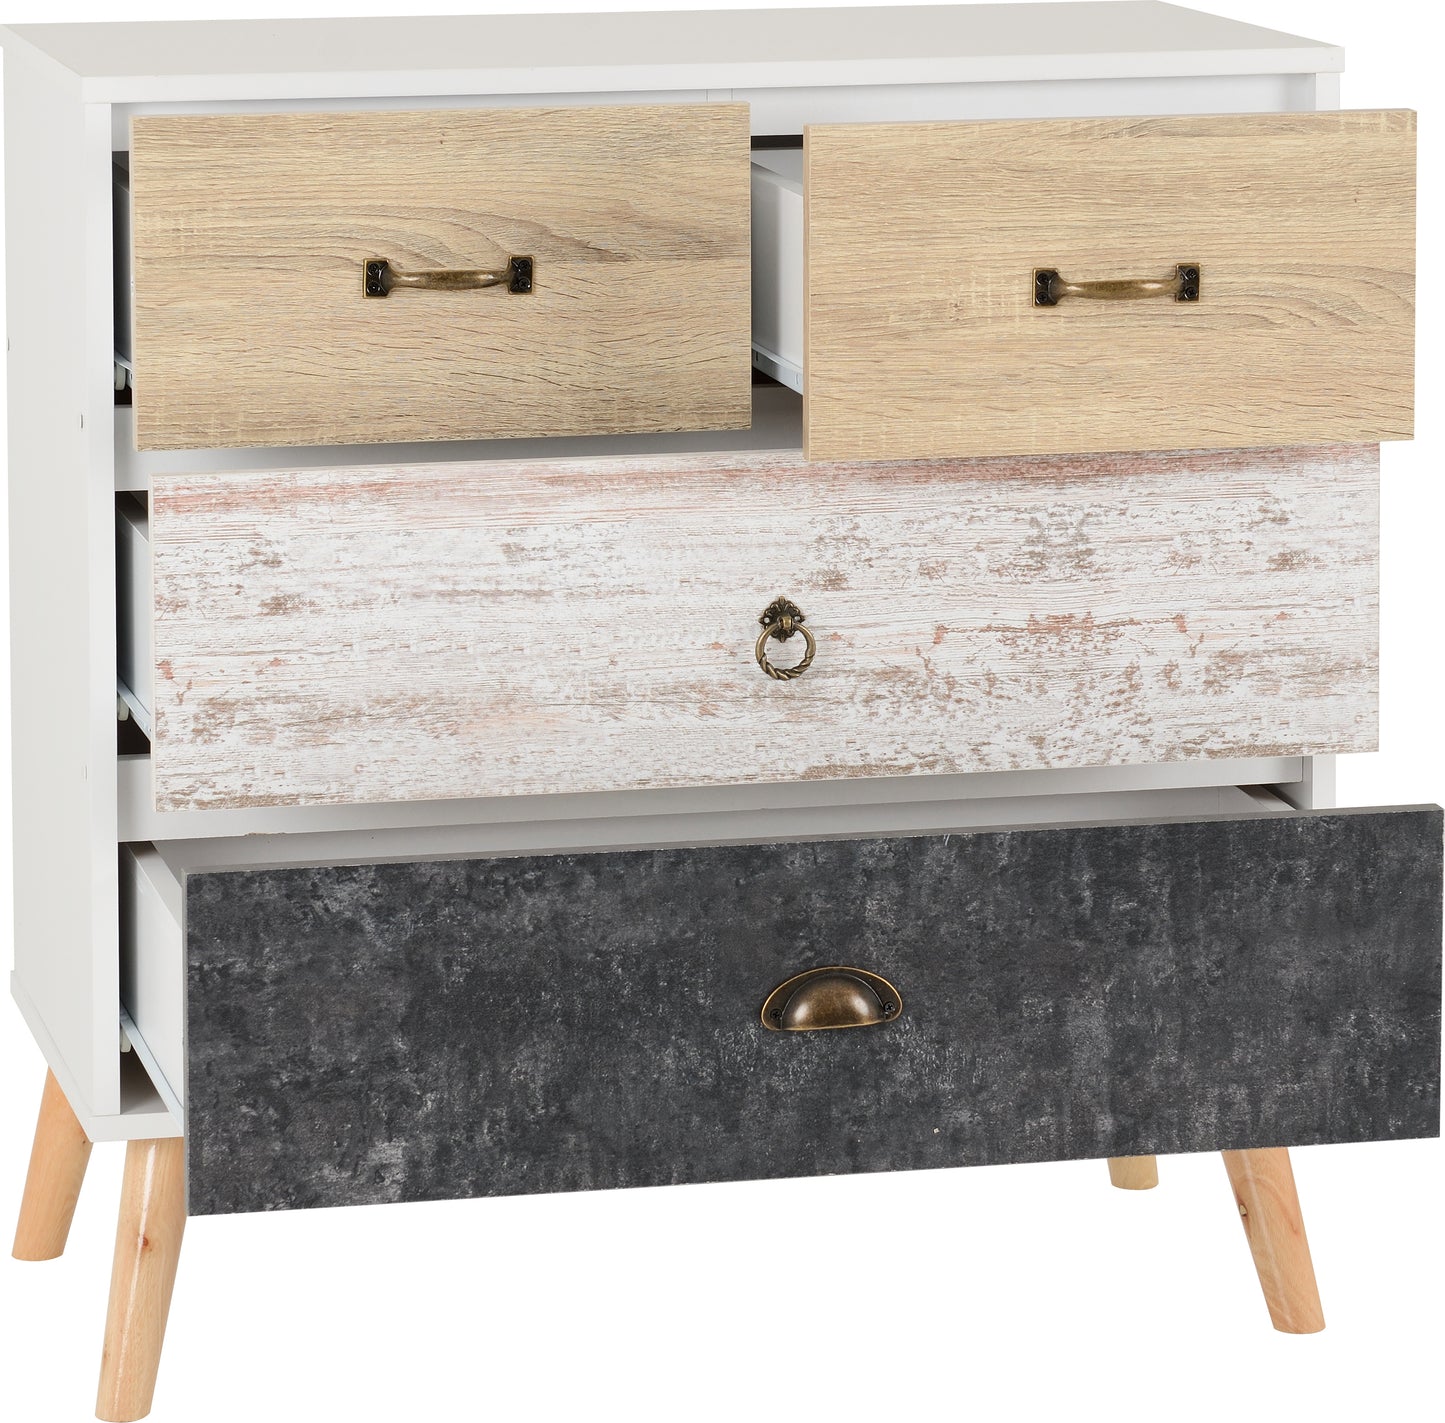 NORDIC 2+2 DRAWER CHEST - WHITE/DISTRESSED EFFECT